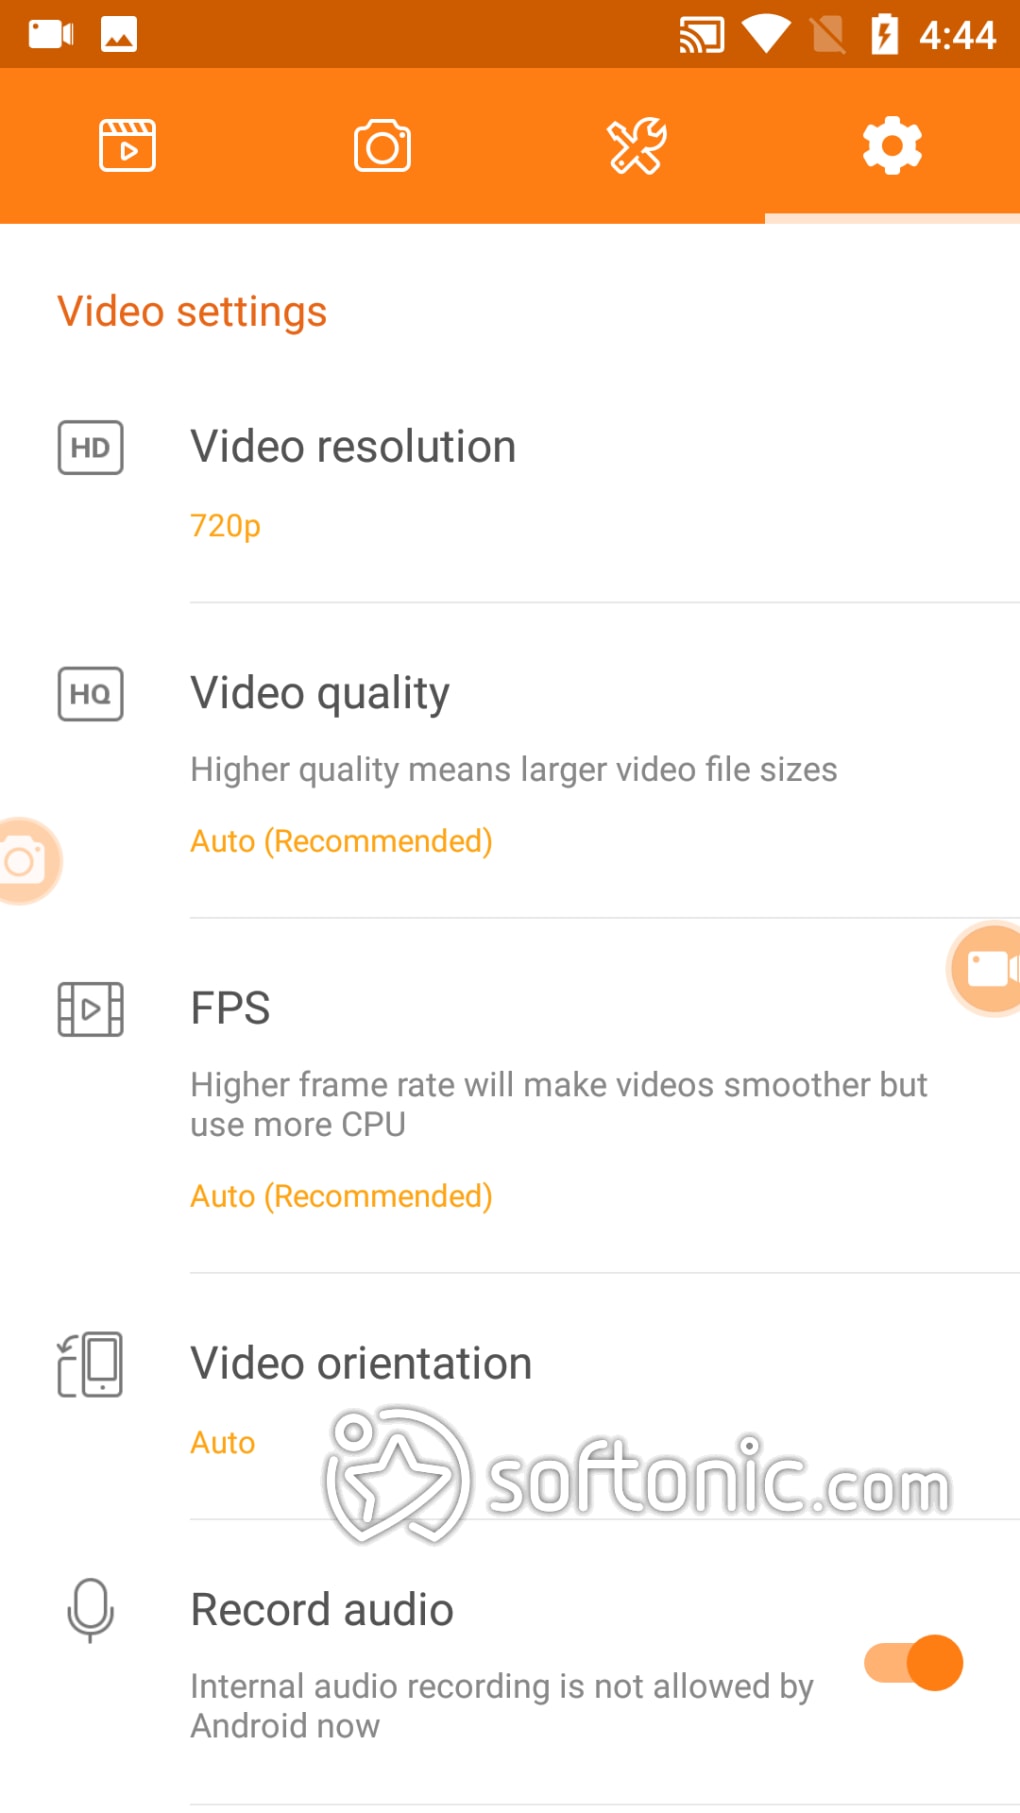 slack Armory Sobbing DU Recorder - Screen Recorder APK for Android - Download